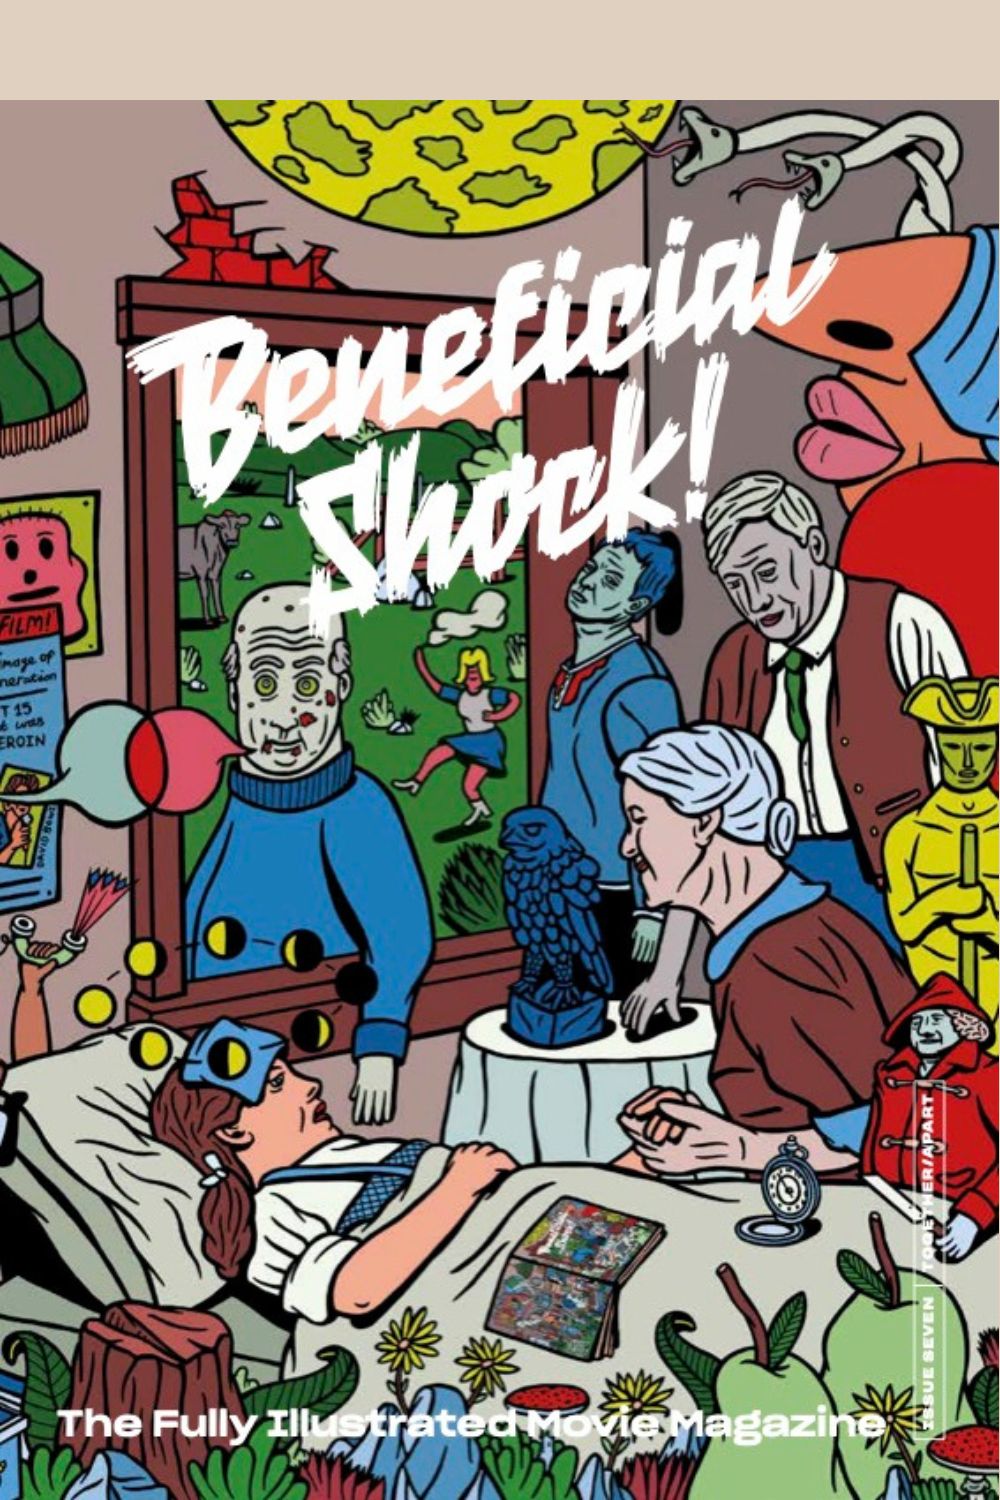 Beneficial Shock! Issue 7